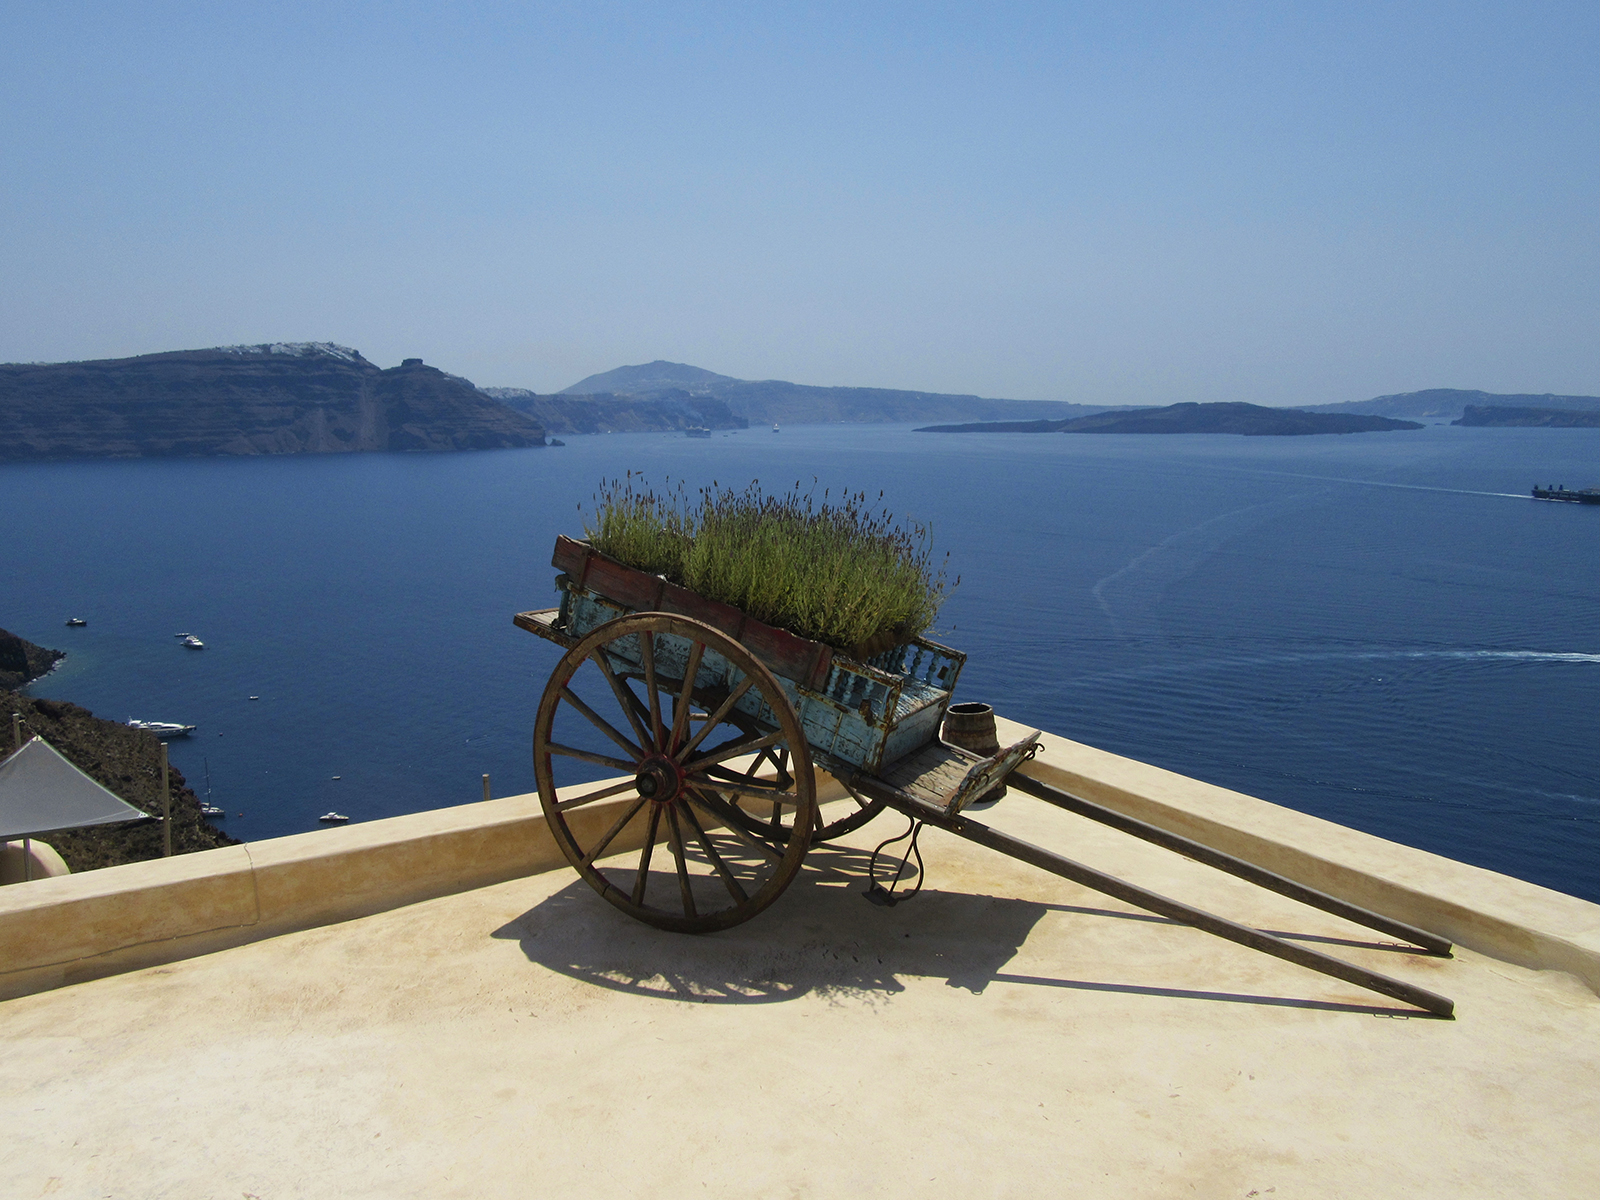 Breath-taking views during the hike from Fira to Oia. Credit: Carolina Valenzuela